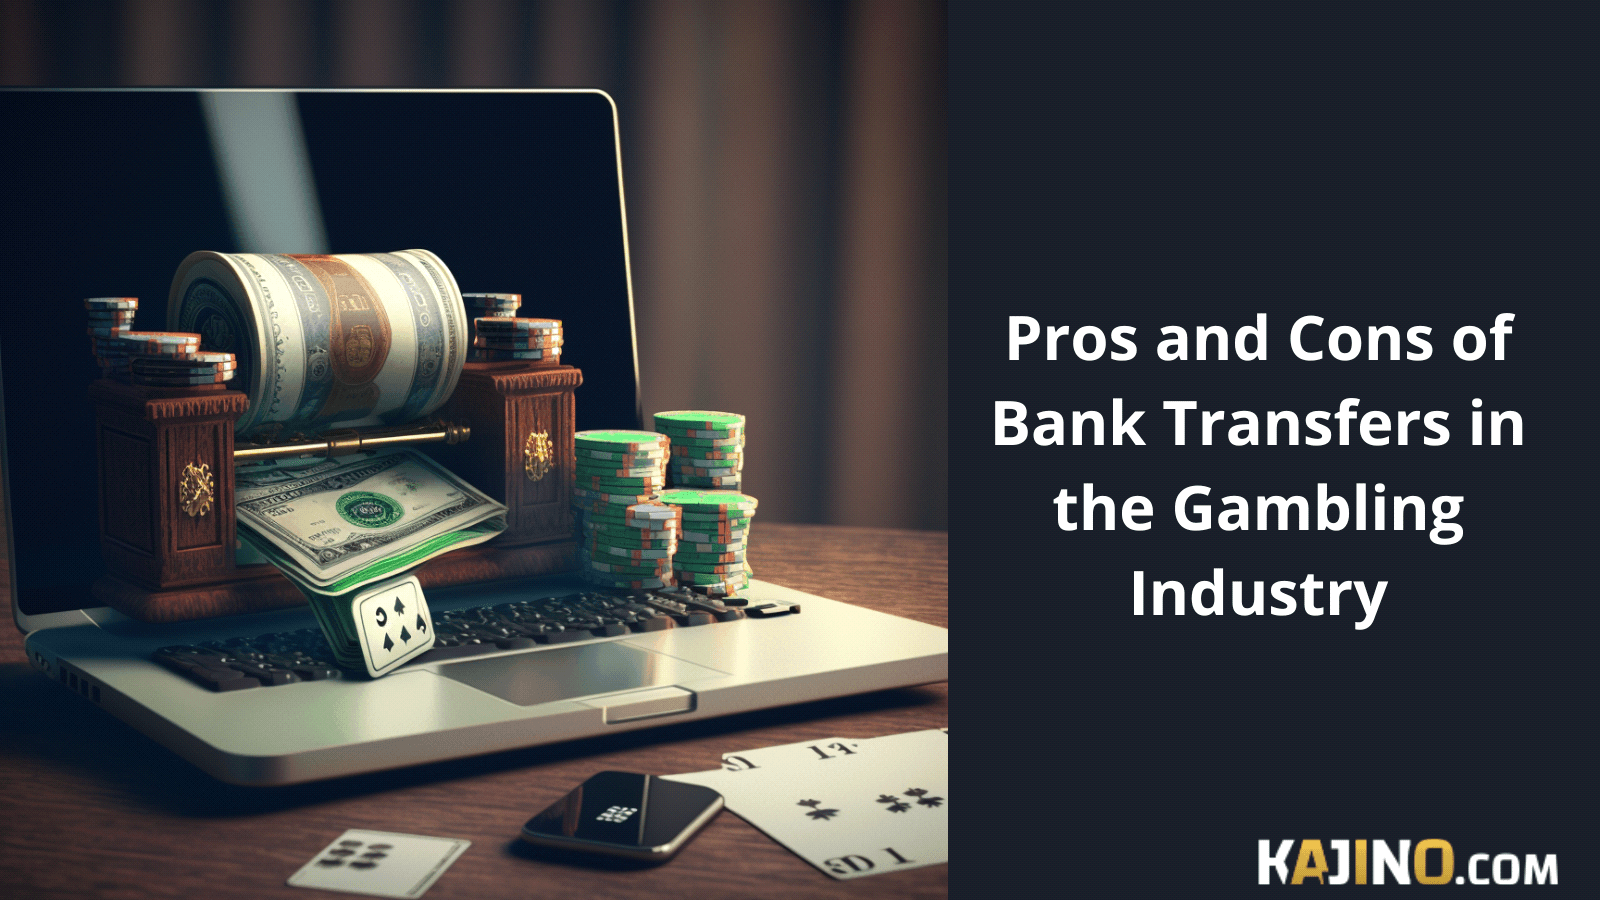 Pros and Cons of Bank Transfers in the Gambling Industry